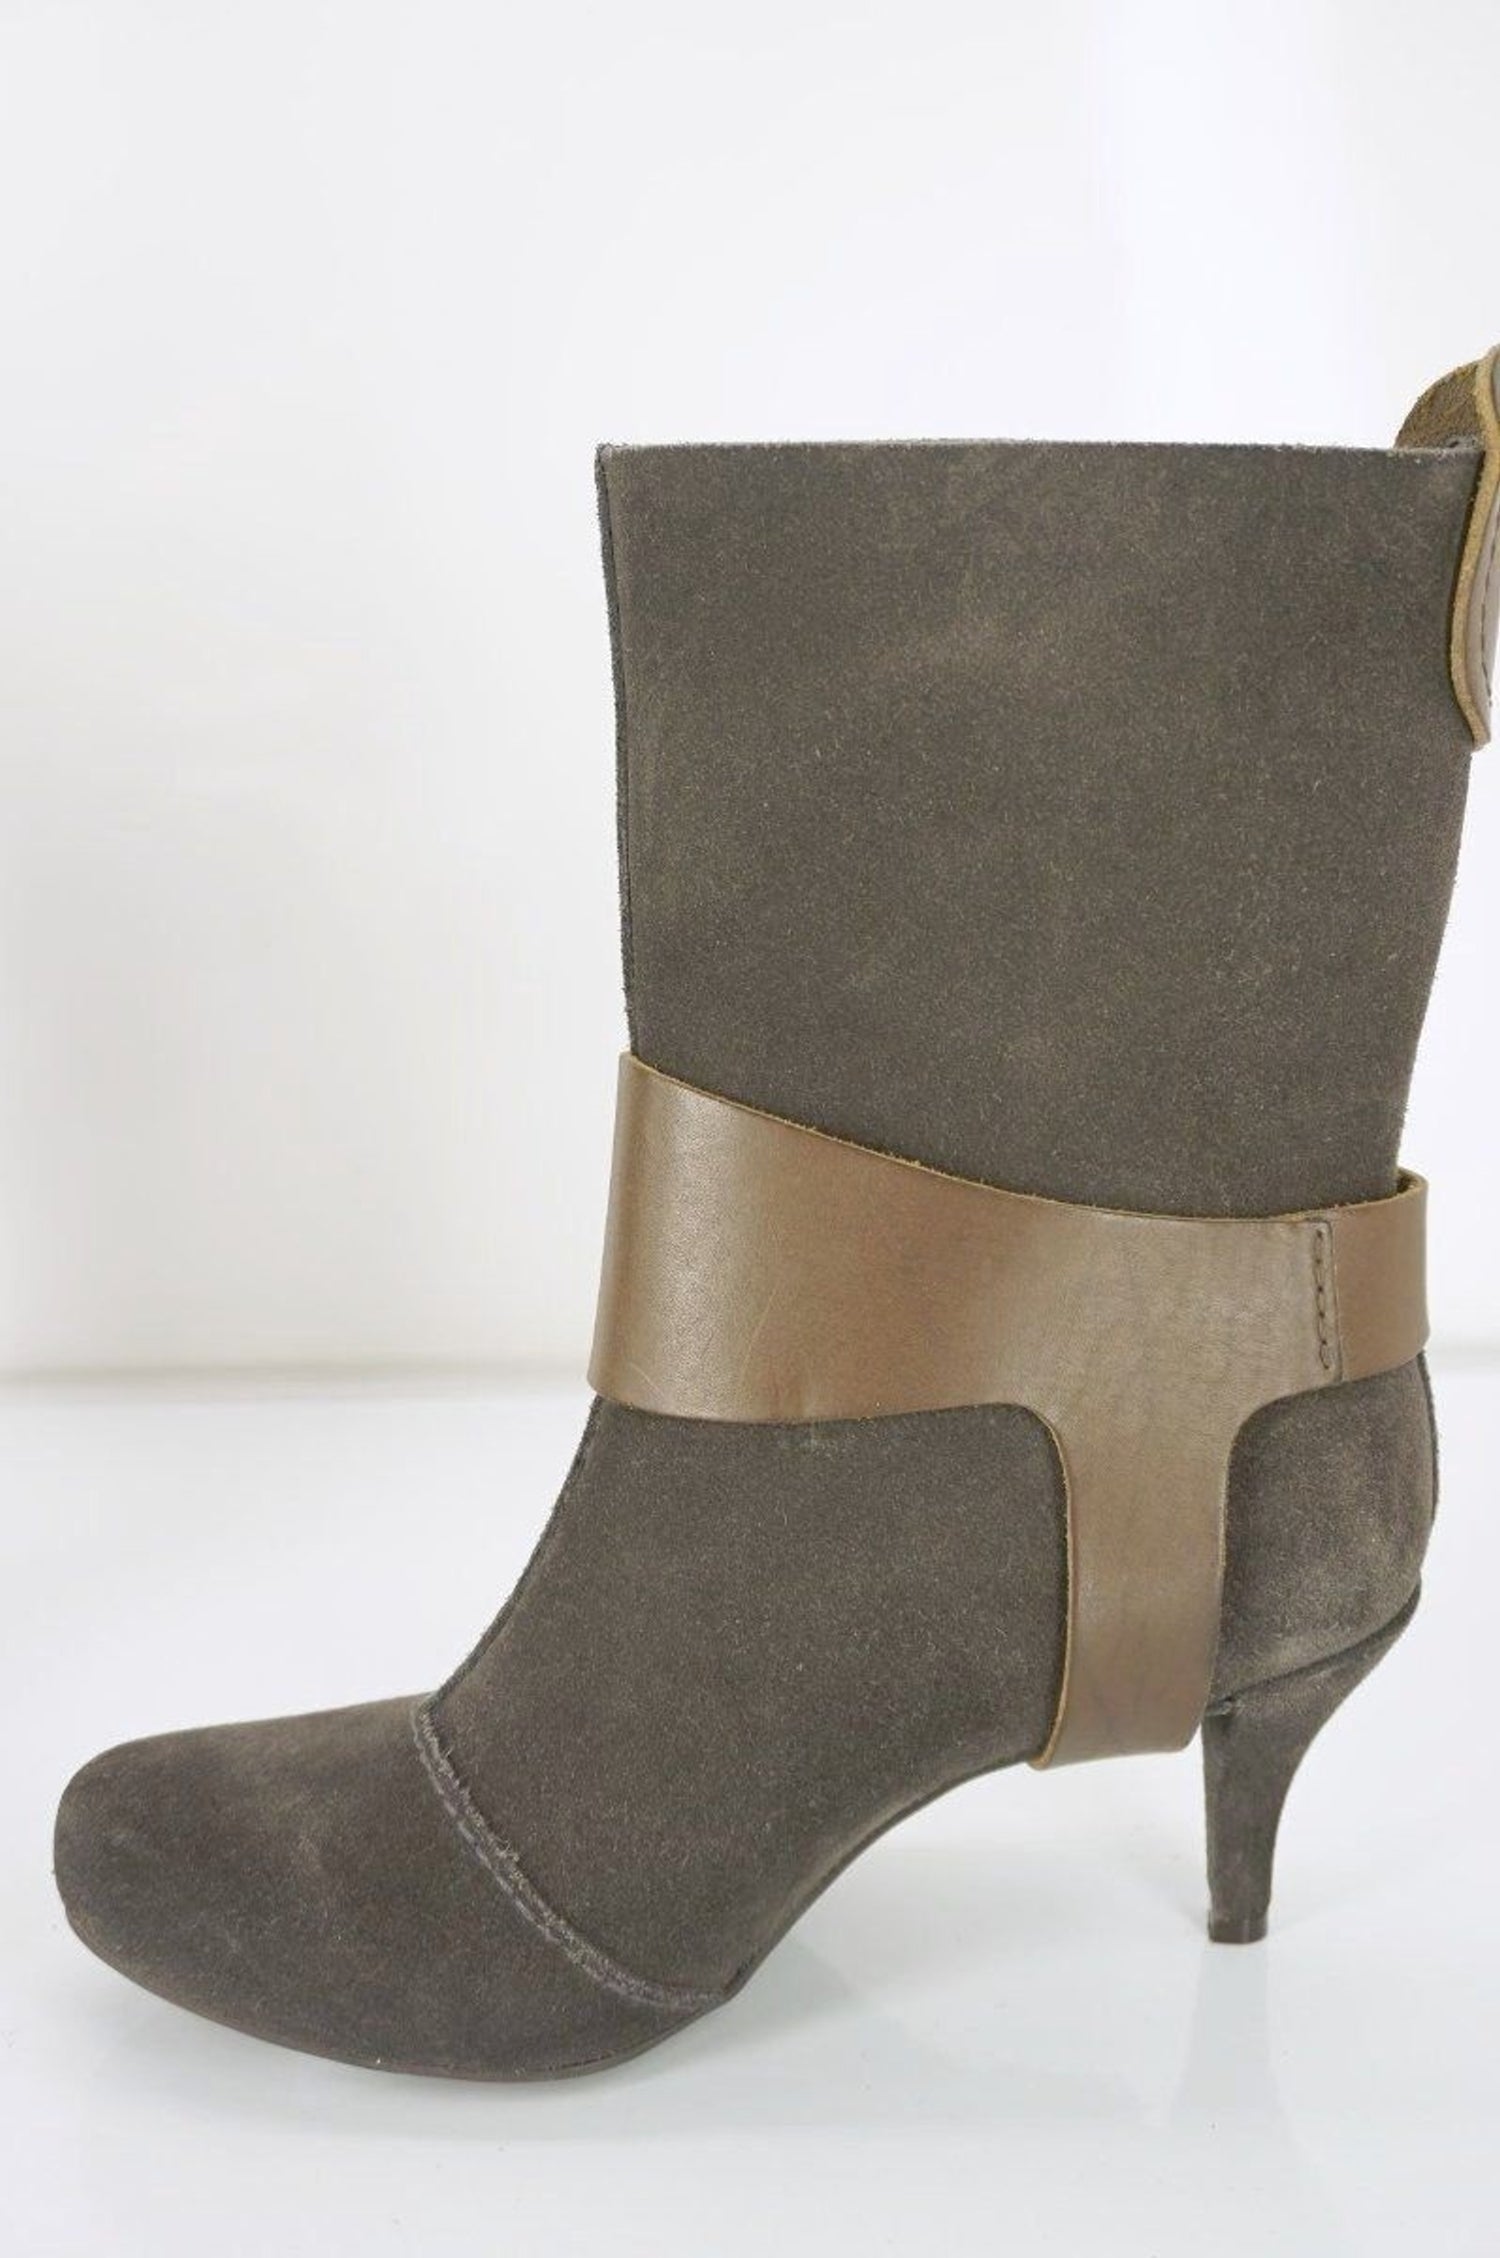 Pedro Garcia Suede Addison Removable Harness Boots Size 36 New $550 Platform